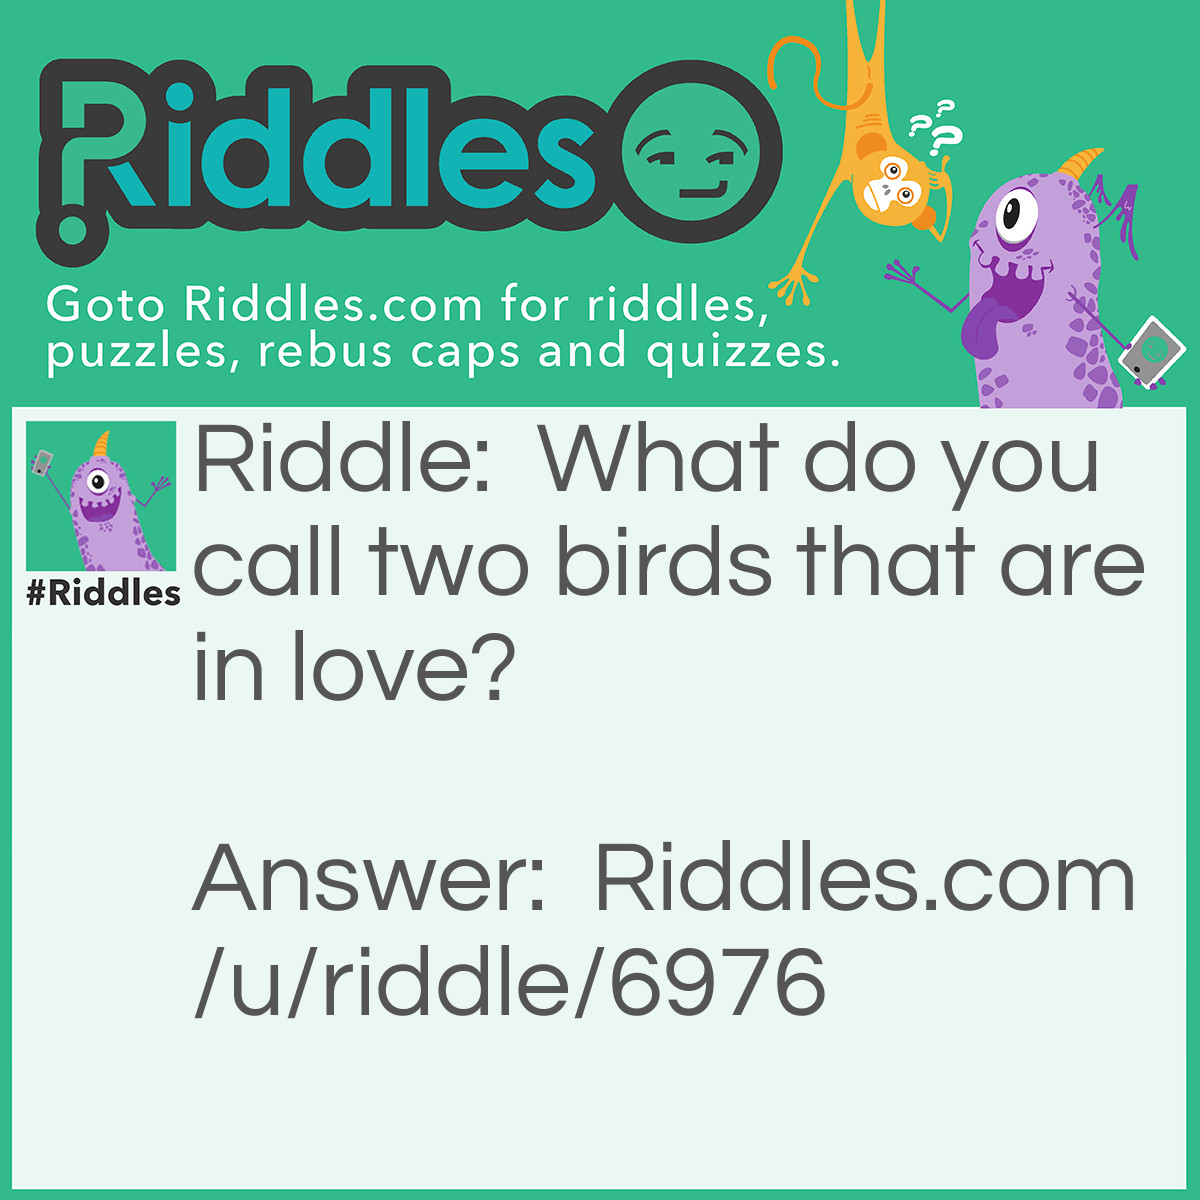 Riddle: What do you call two birds that are in love? Answer: Tweet-hearts